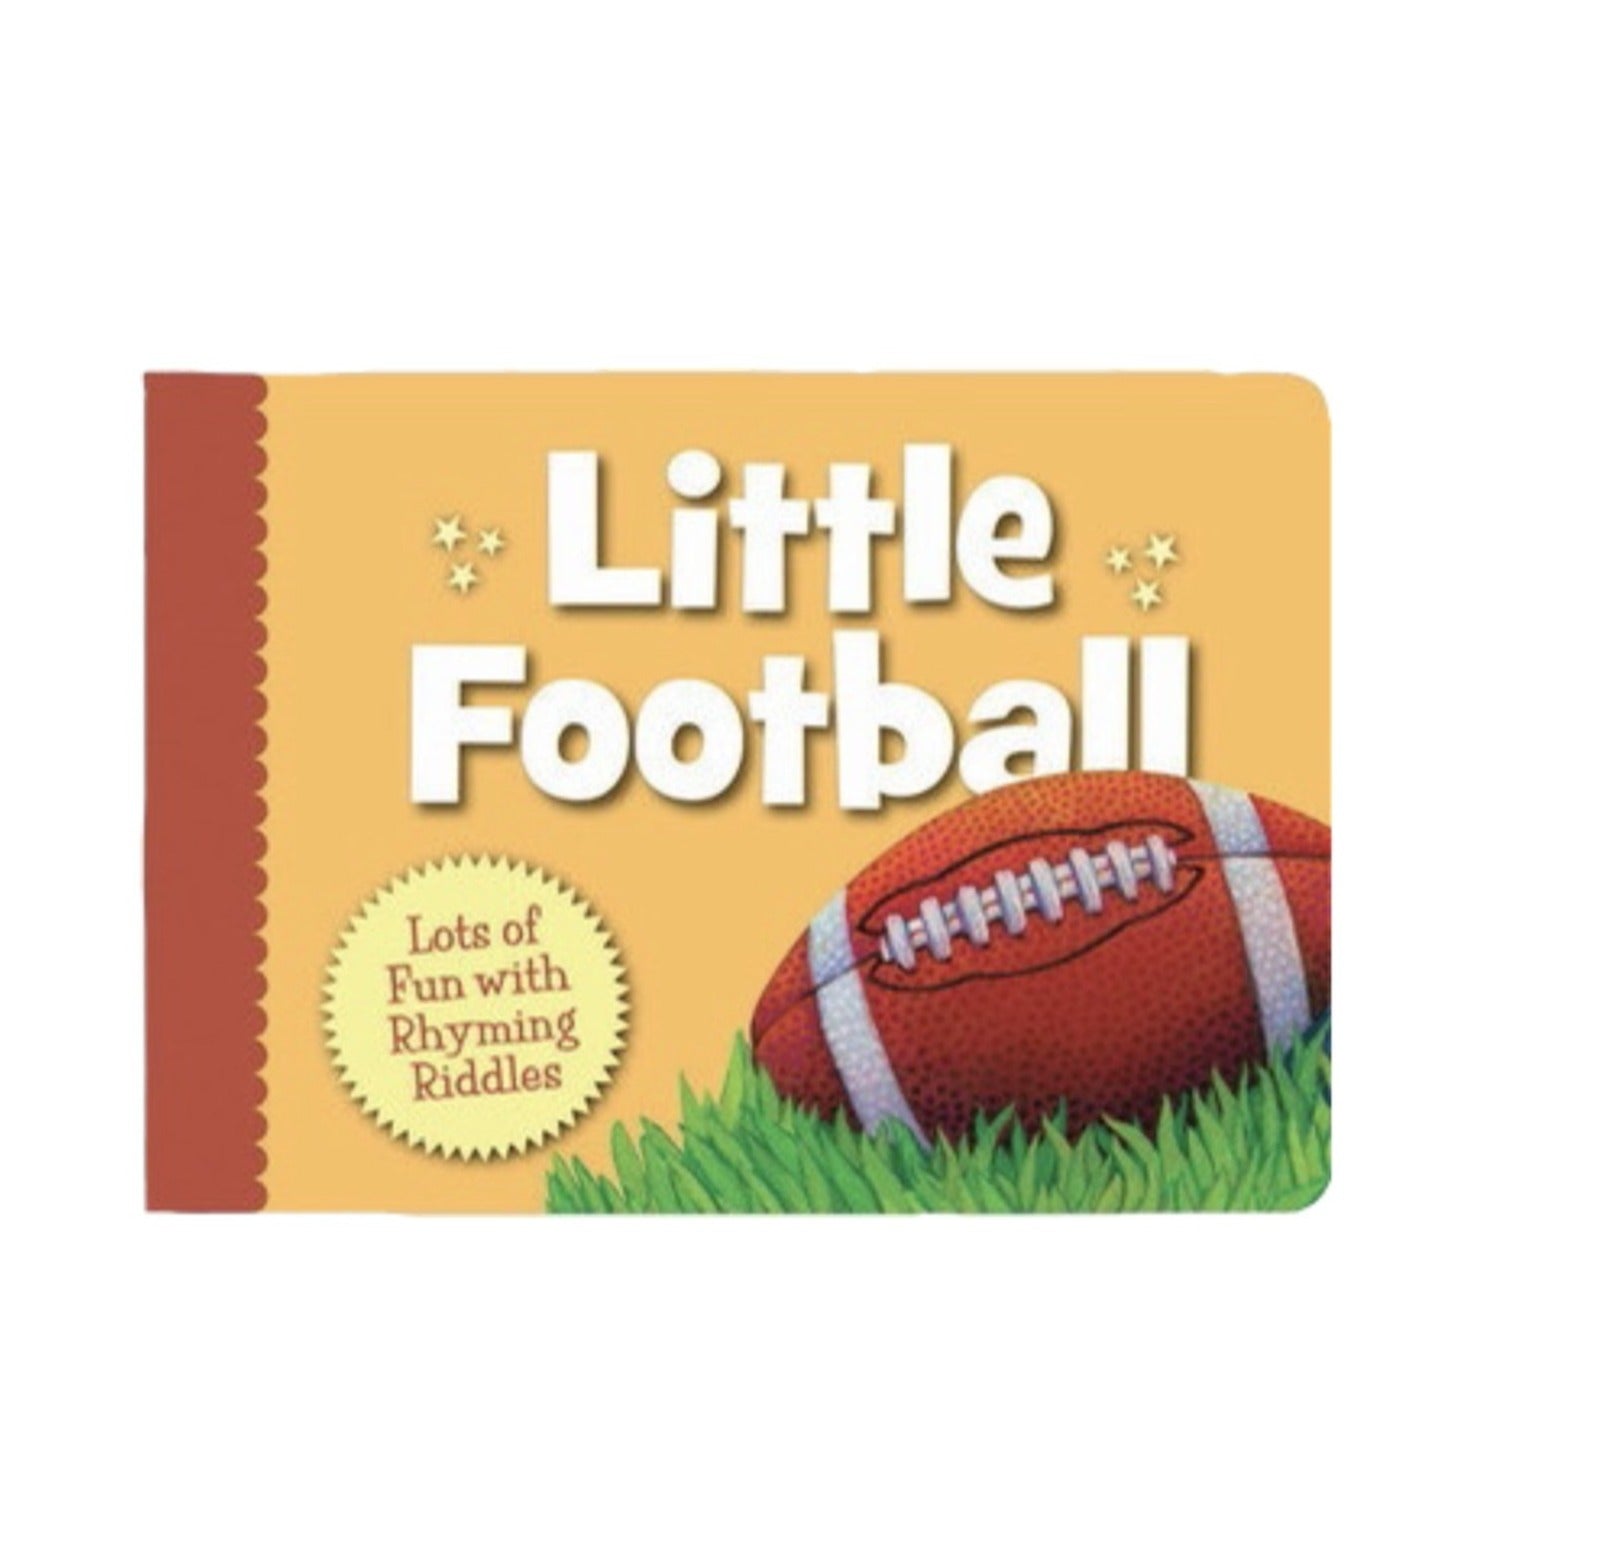 yellow book with "Little Football" written on front with green grasses and football on front